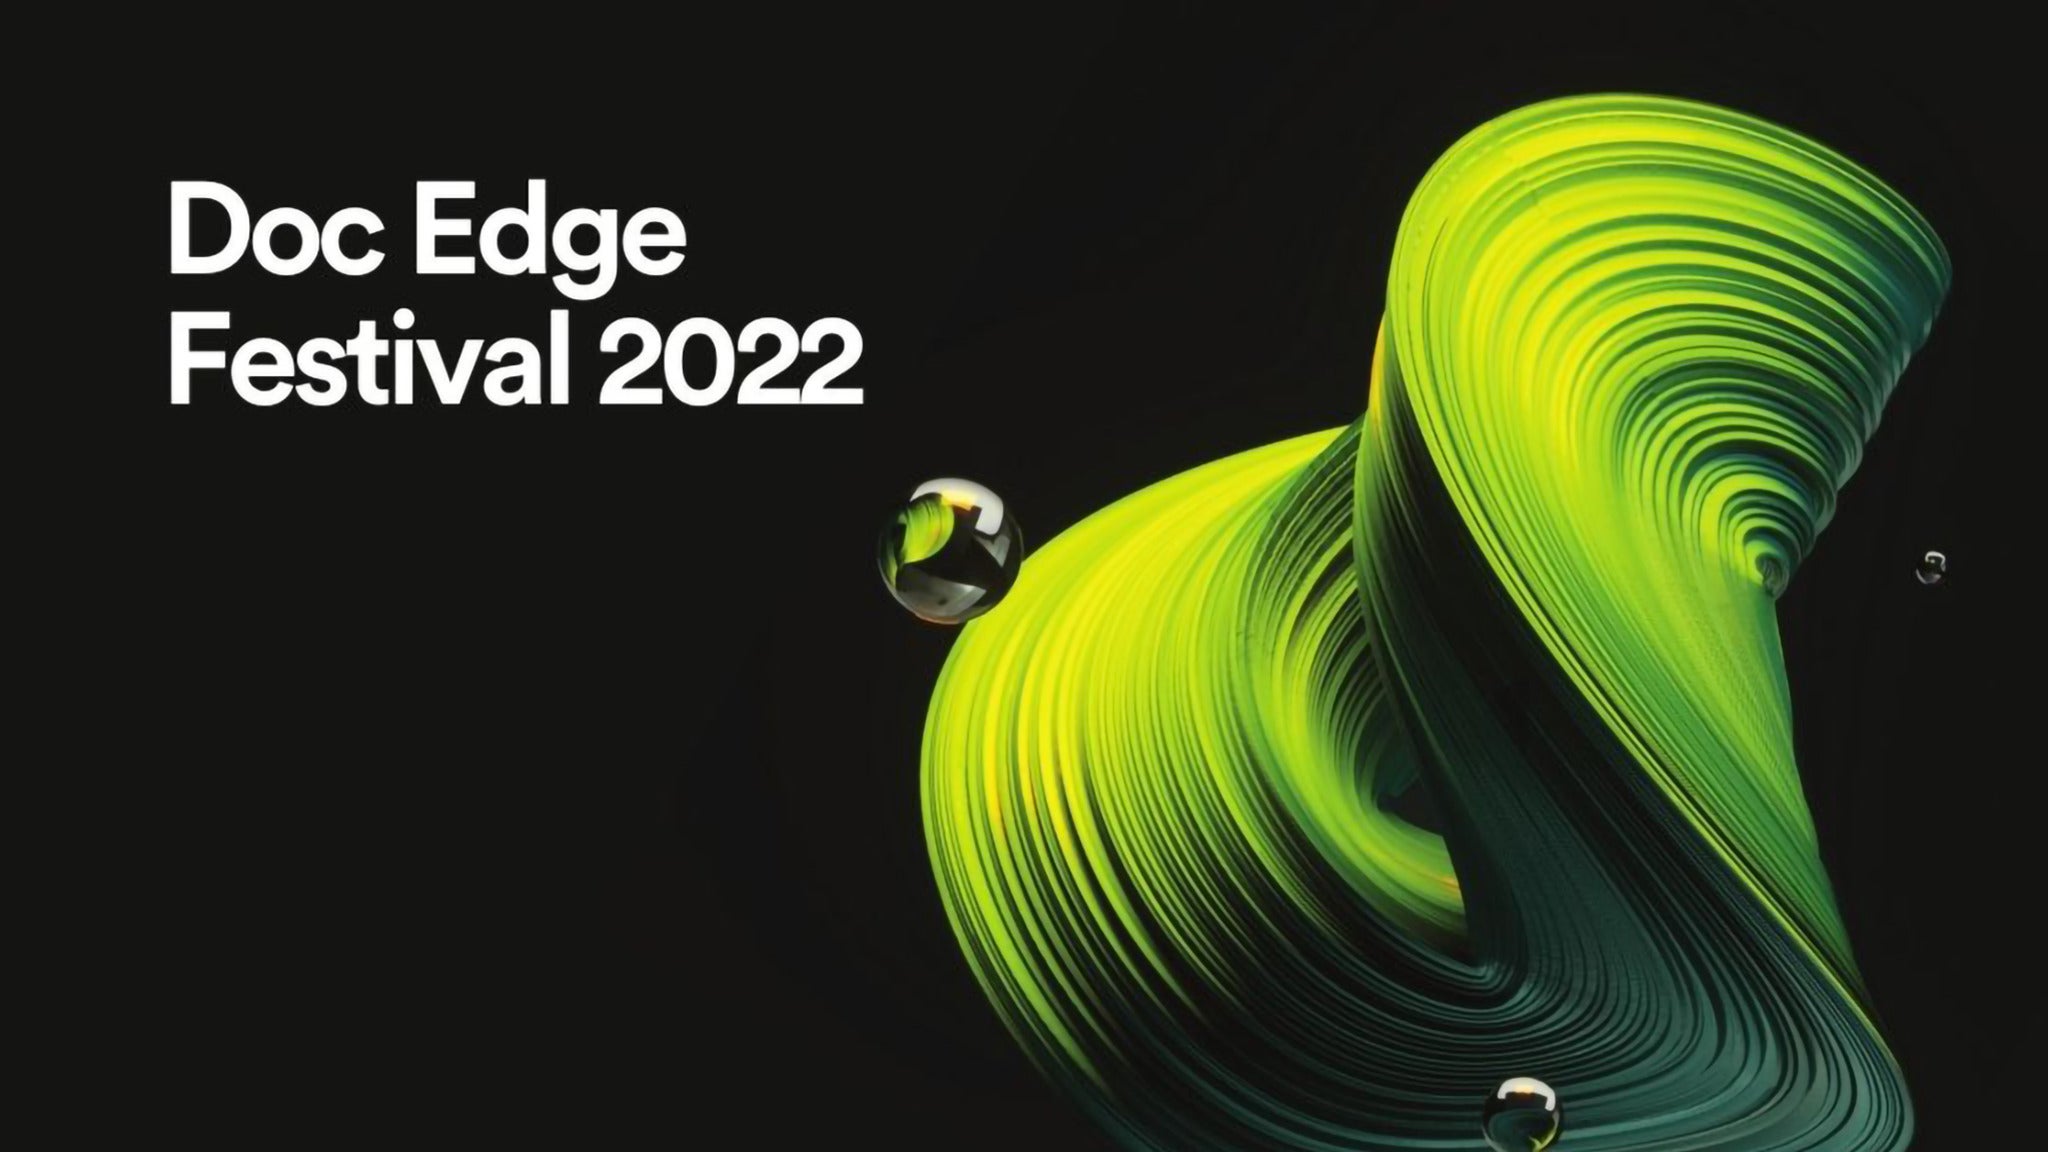 Image used with permission from Ticketmaster | Doc Edge Festival 2022: Unseen Skies tickets